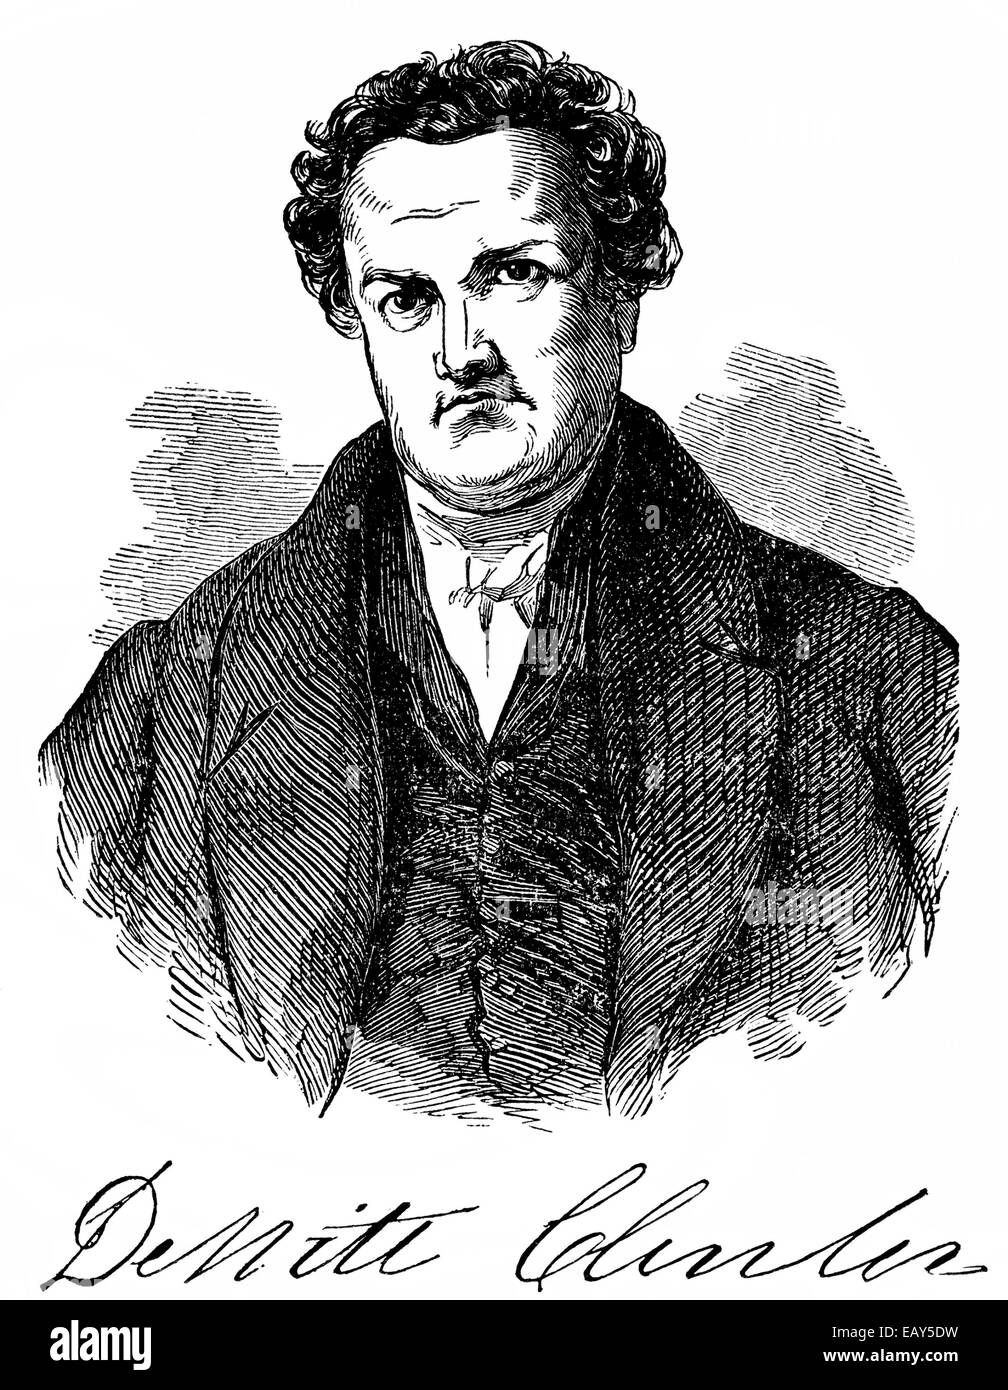 DeWitt Clinton, 1769 - 1828, American politician, mayor of New York City and Governor of the State of New York, Portrait von DeW Stock Photo